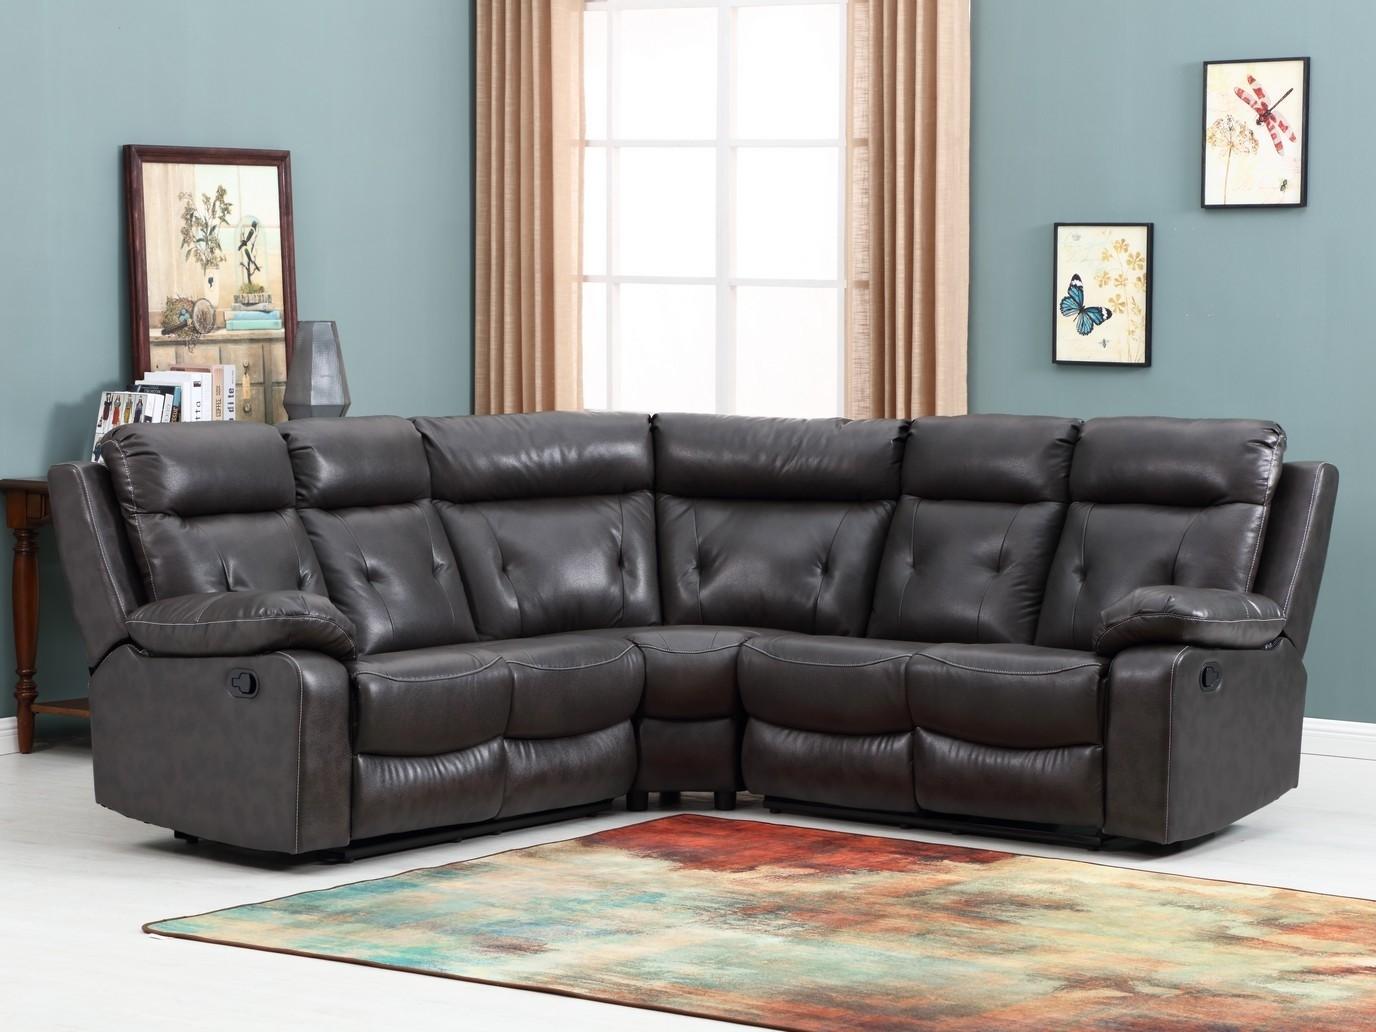 Contemporary Reclining Sectional 9443 9443-DARK-GRAY in Dark Gray Leather Air Material